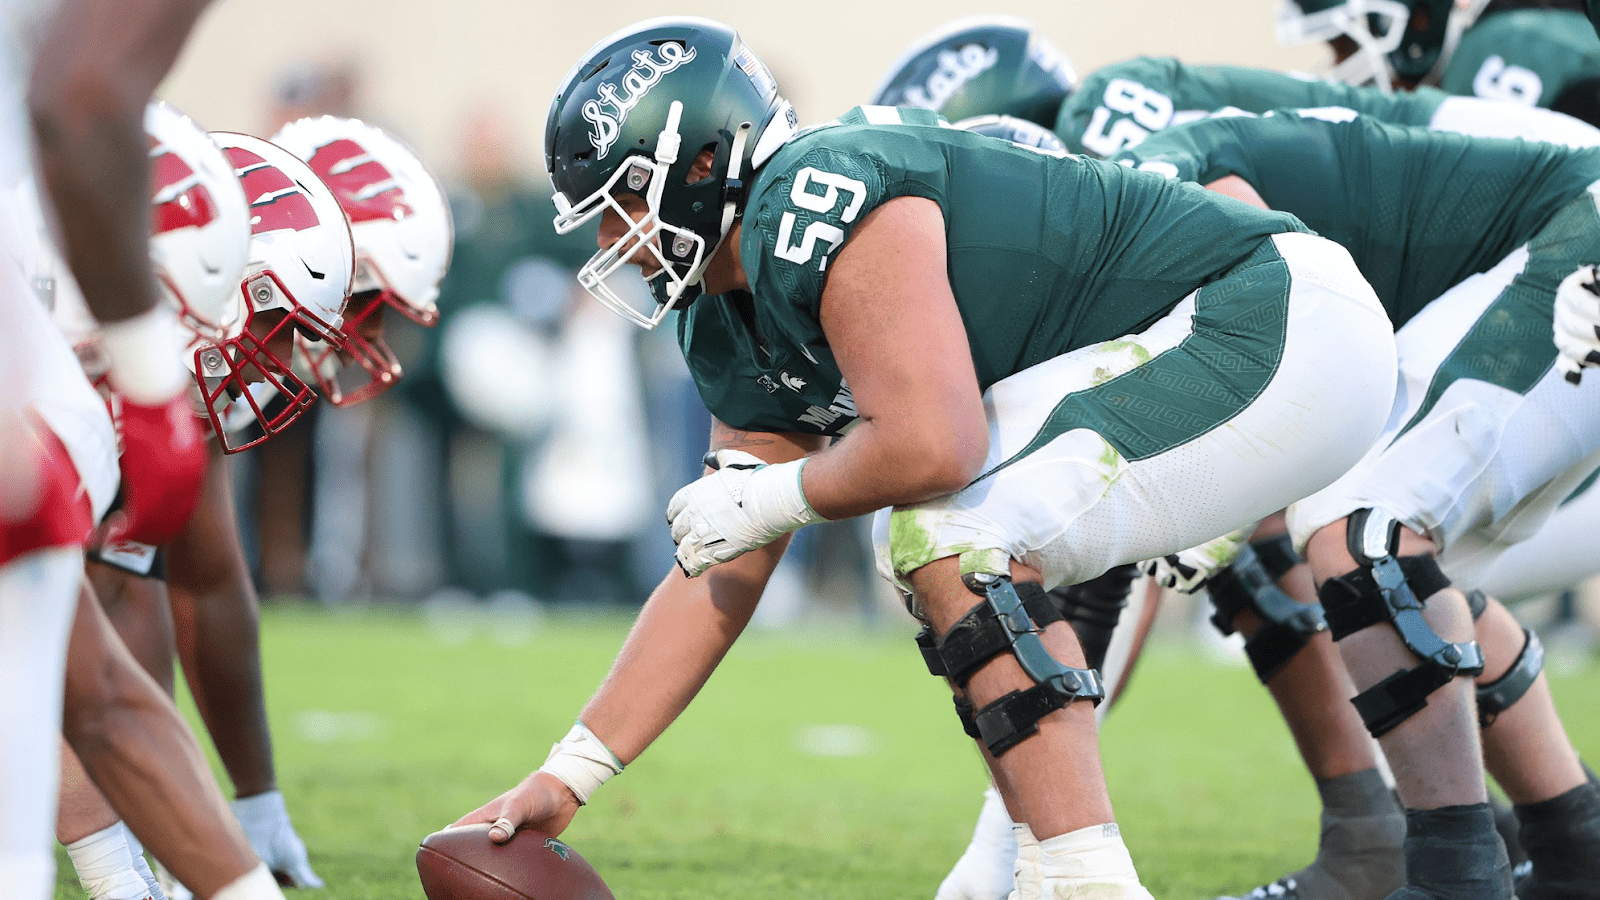 Nick Samac is a solid athlete and effective center in Michigan State's offense. Hula Bowl scout Ian McNice breaks down Samac as an NFL Prospect in his report.